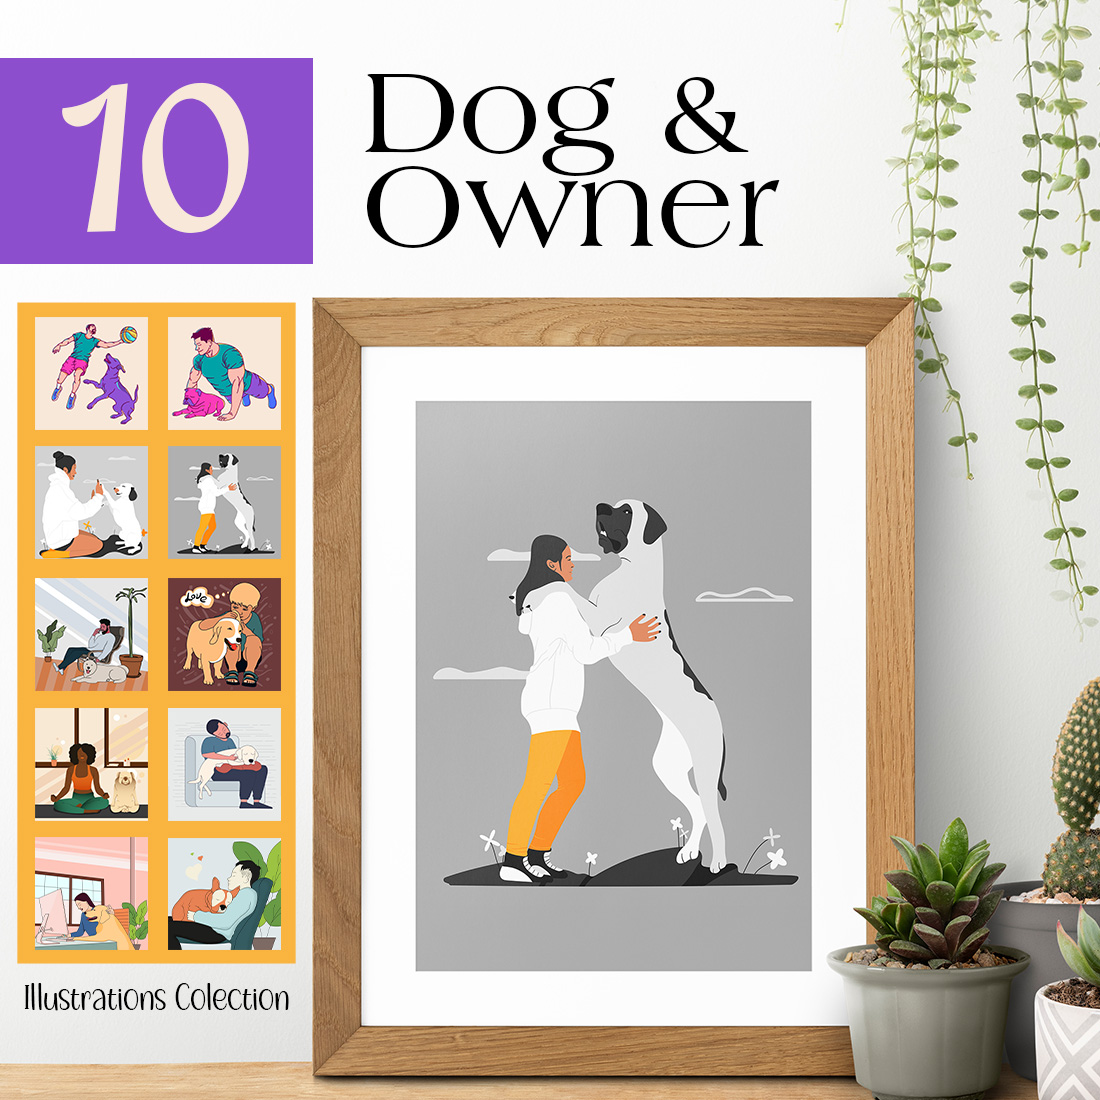 Dog & Owner illustraions collection preview image.